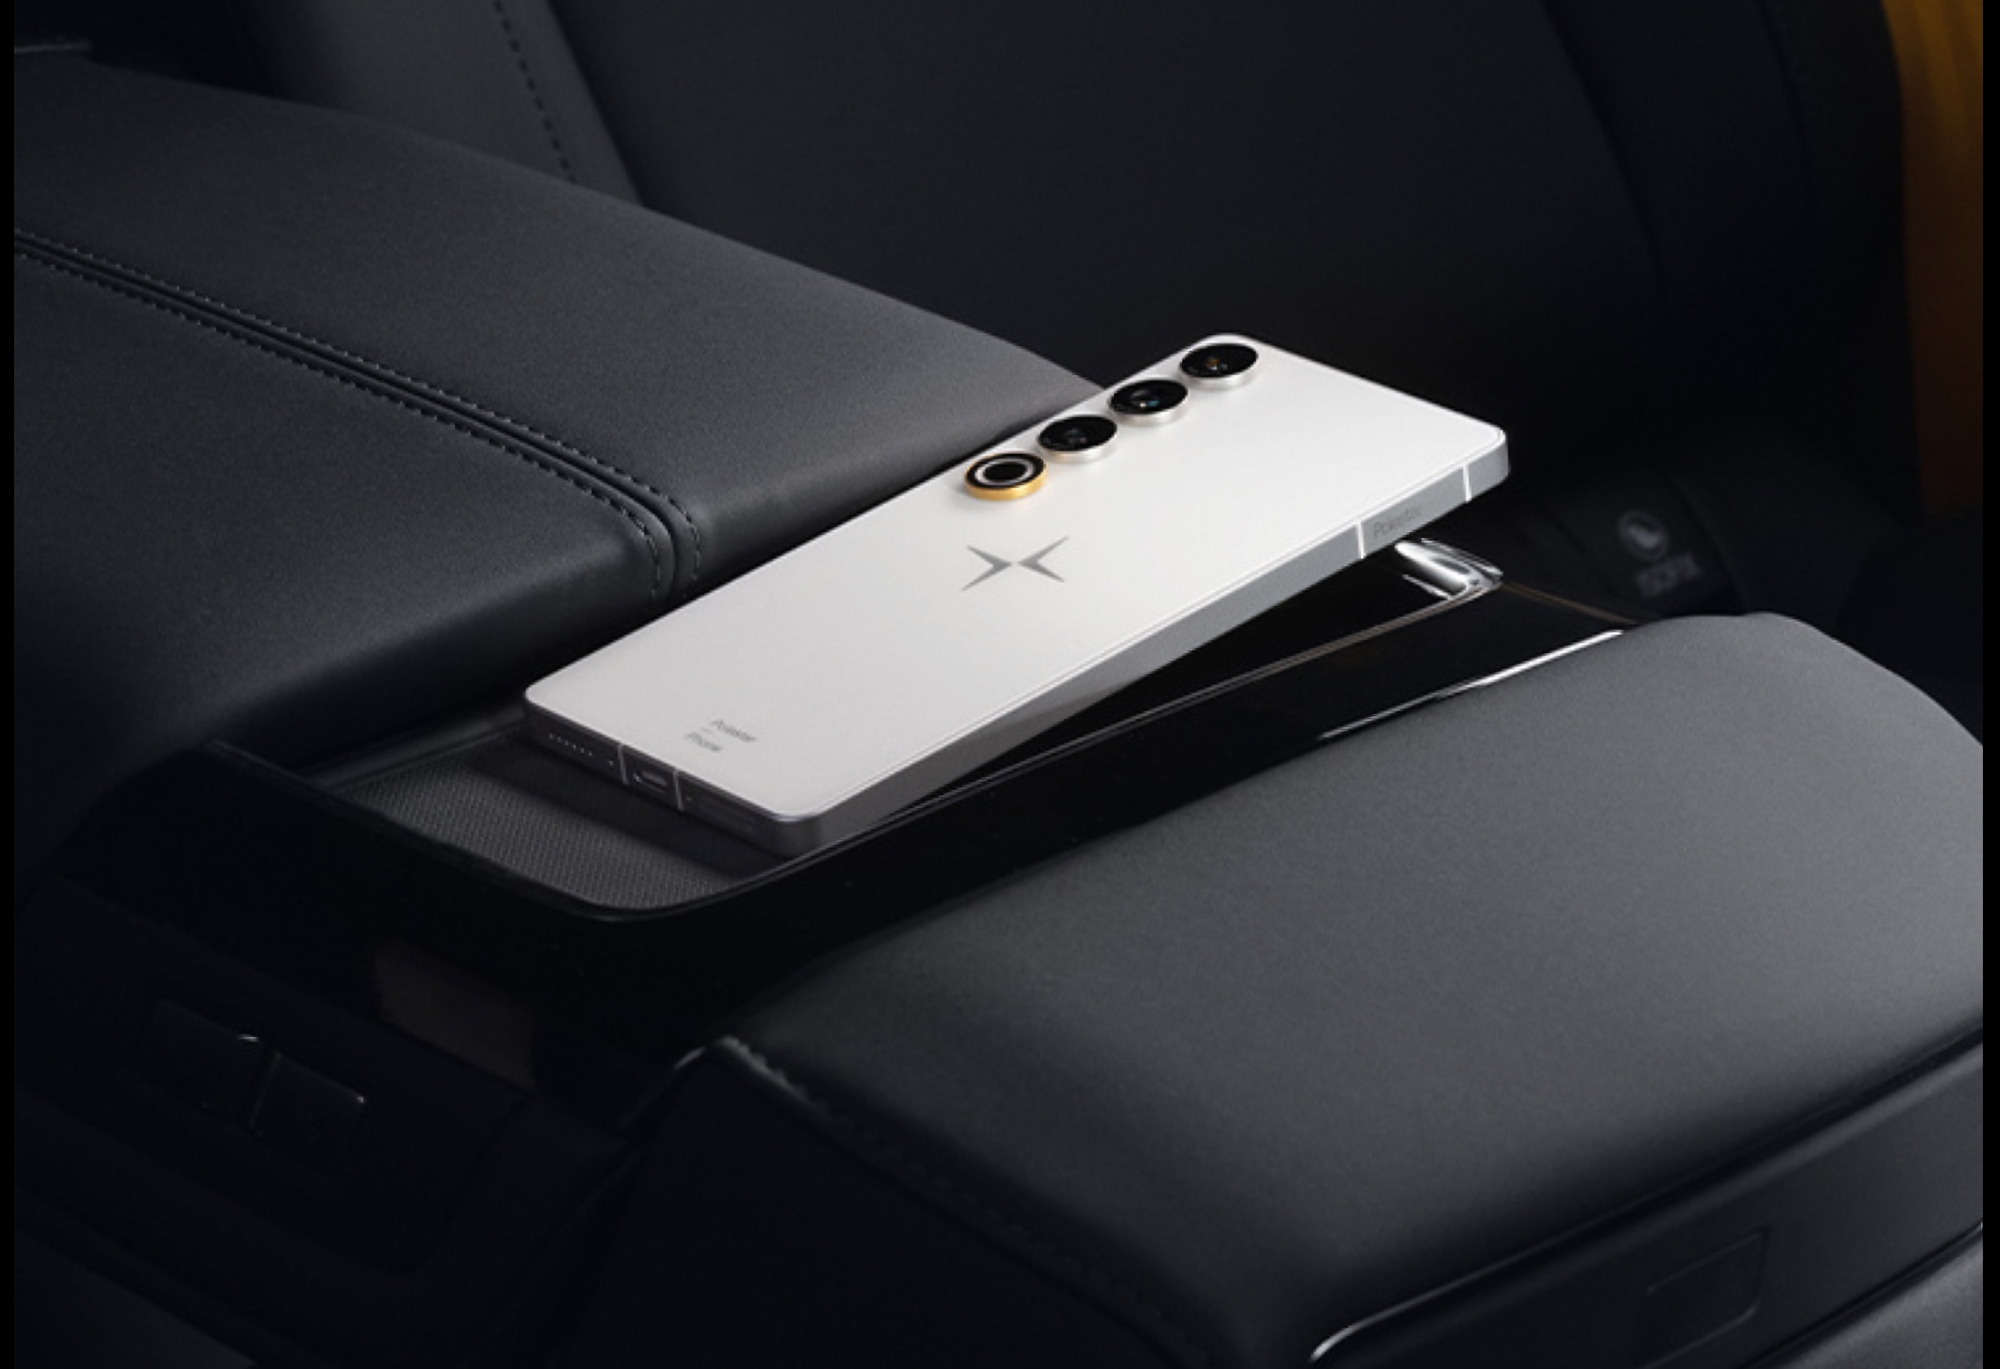 Electric car maker Polestar will unveil its first smartphone on 23 April